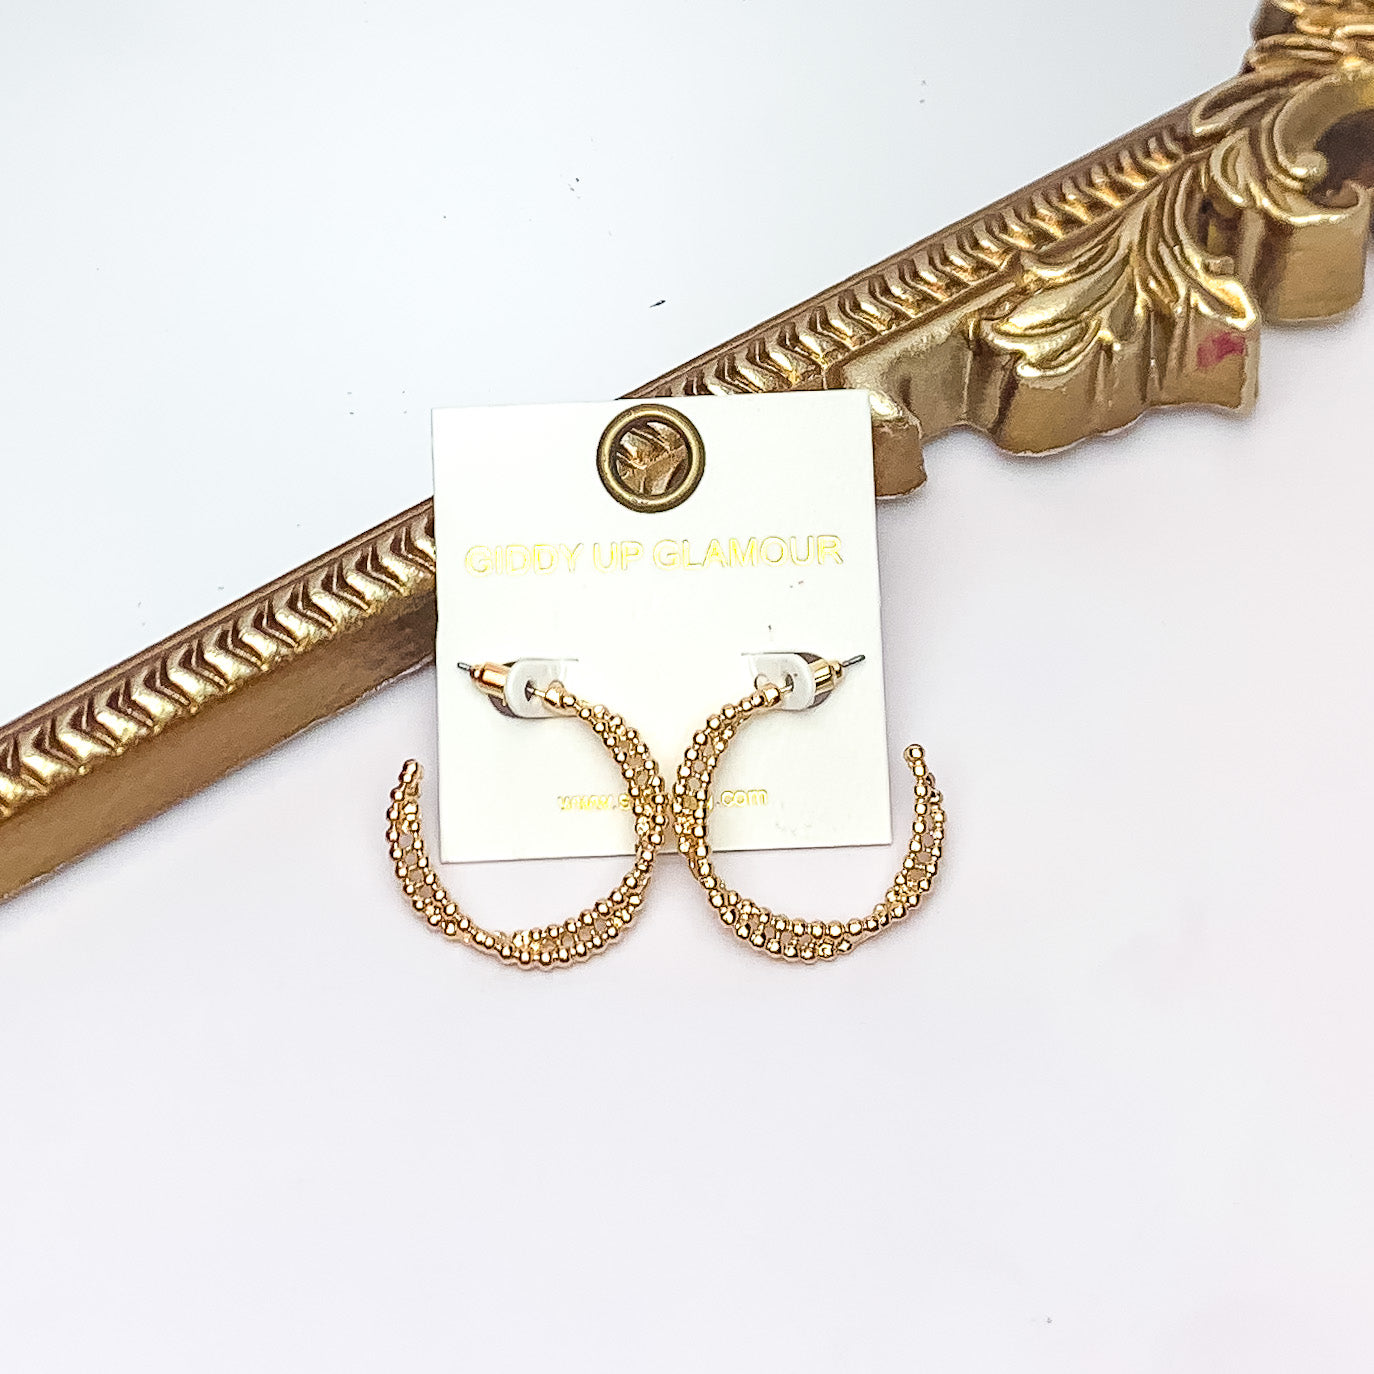 Everyday Glam Double Twisted Hoop Earrings in Gold Tone. Pictured on a white background with a gold frame behind the earrings.